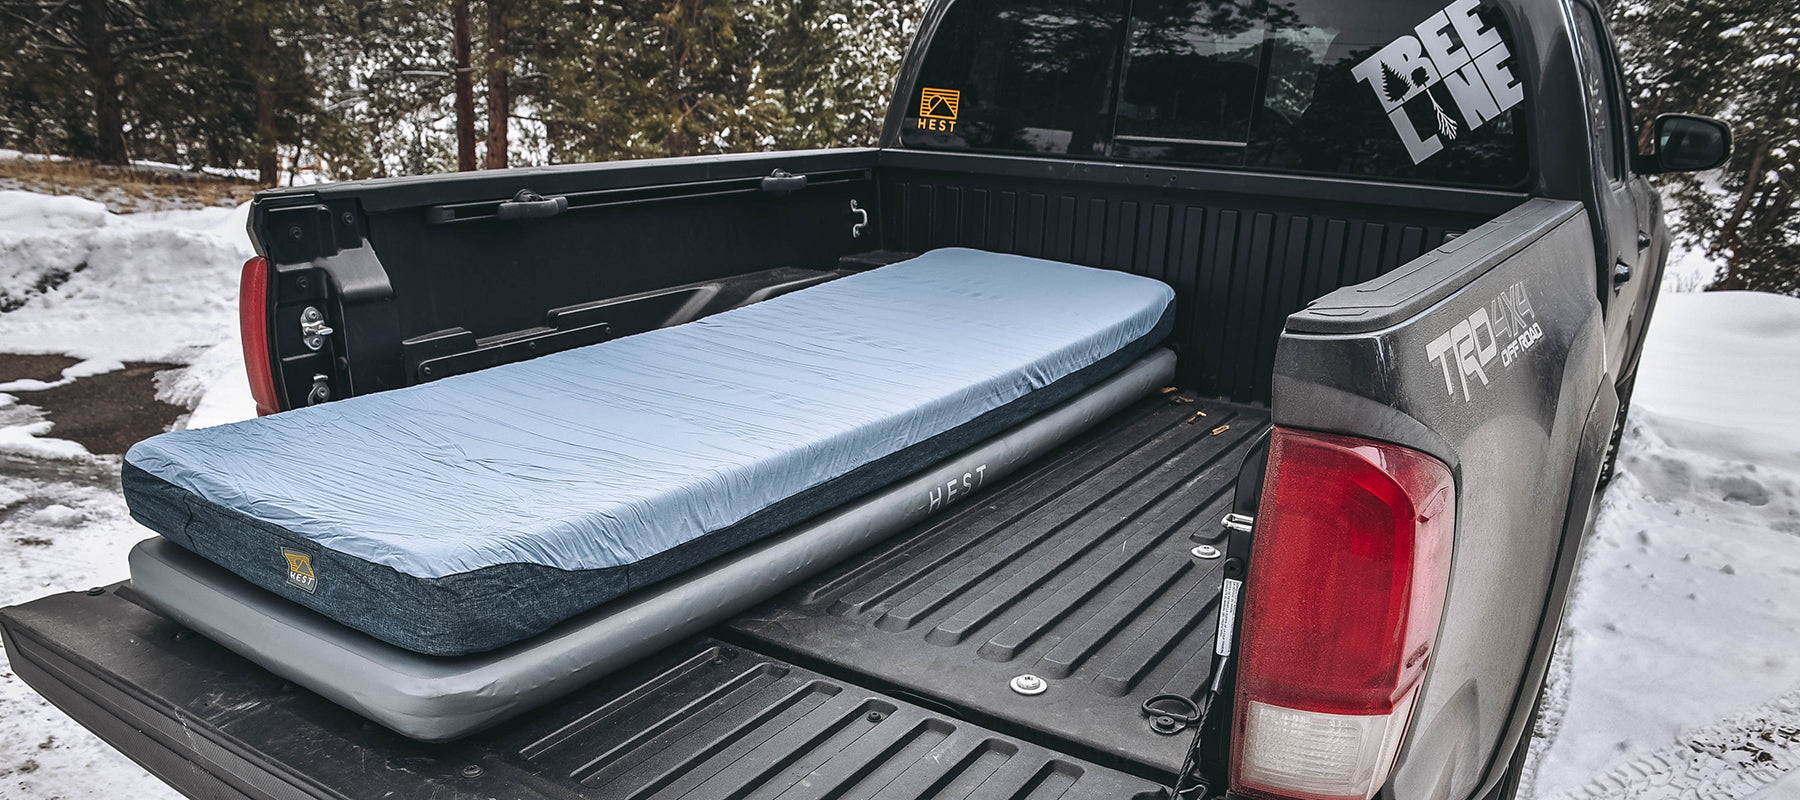 toyota tacoma queen size mattress